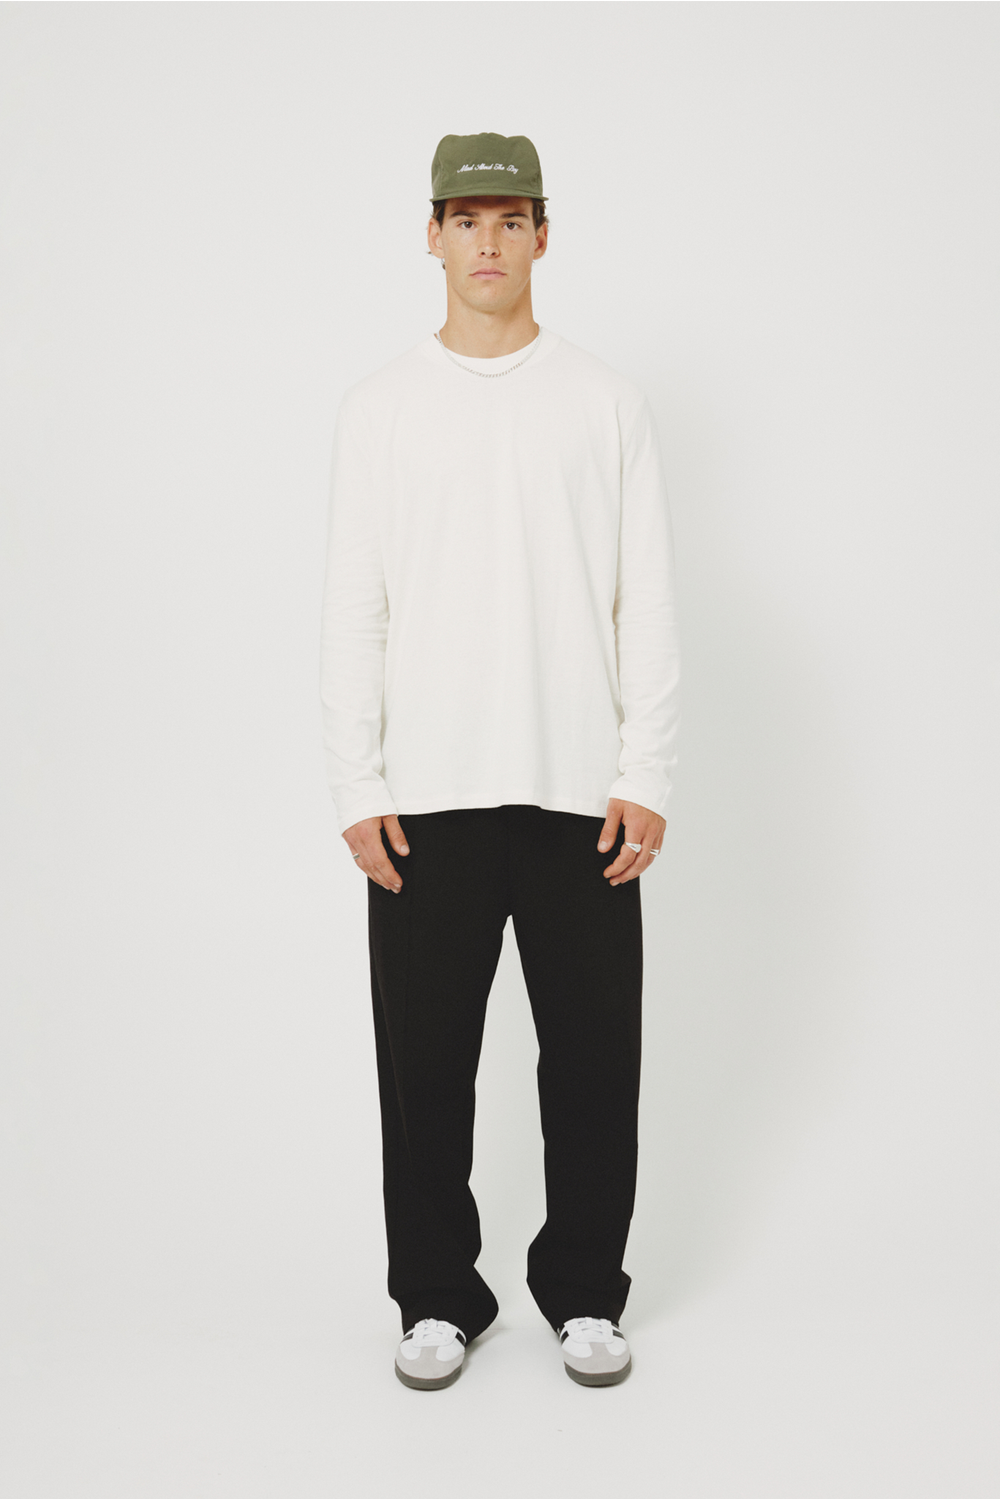 Commoners Hemp Jersey LS - Rice White | COMMONERS | Mad About The Boy